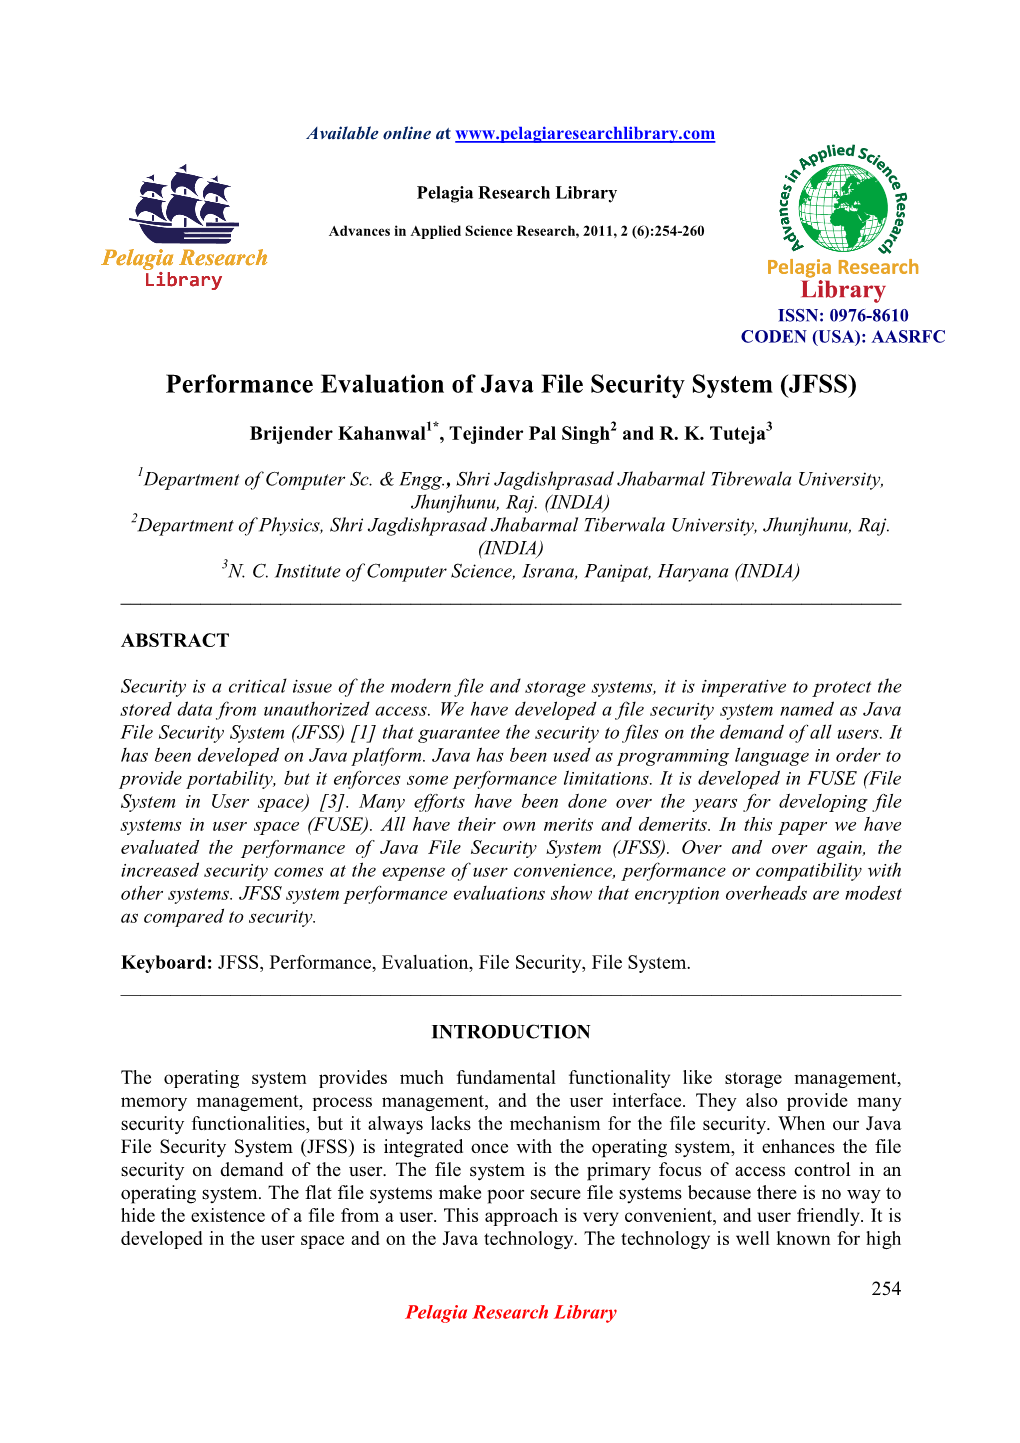 Performance Evaluation of Java File Security System (JFSS)